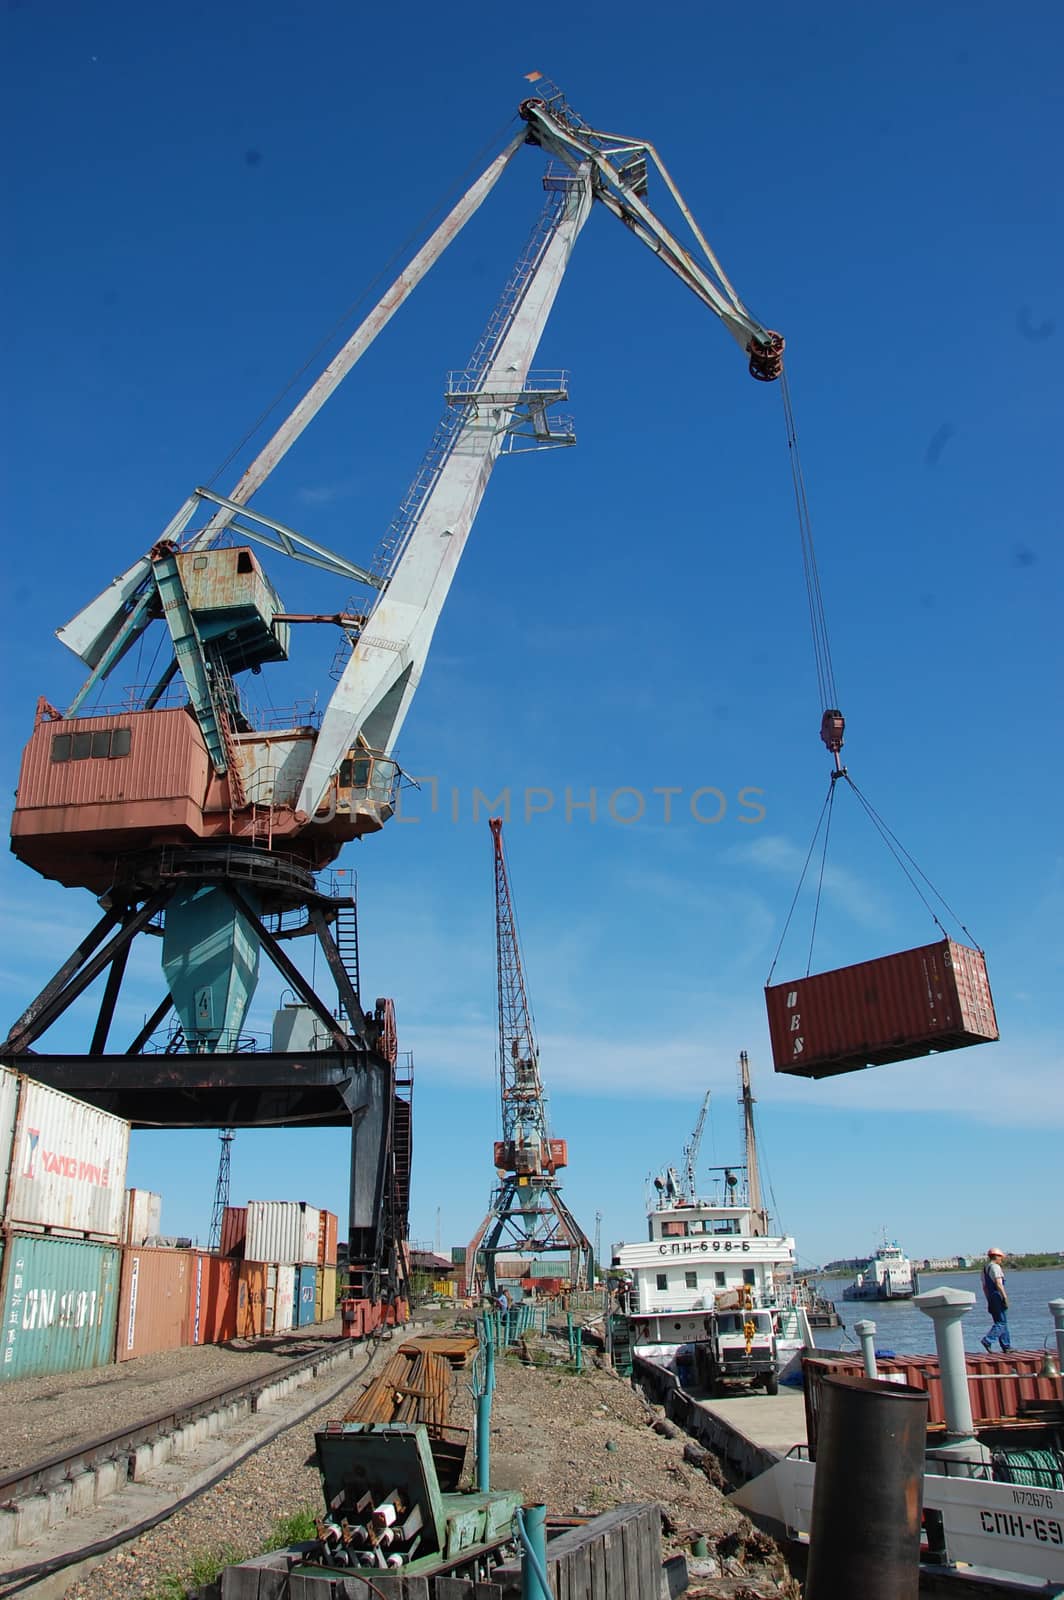 Dockside cargo crane with container at river port, Kolyma, Russia